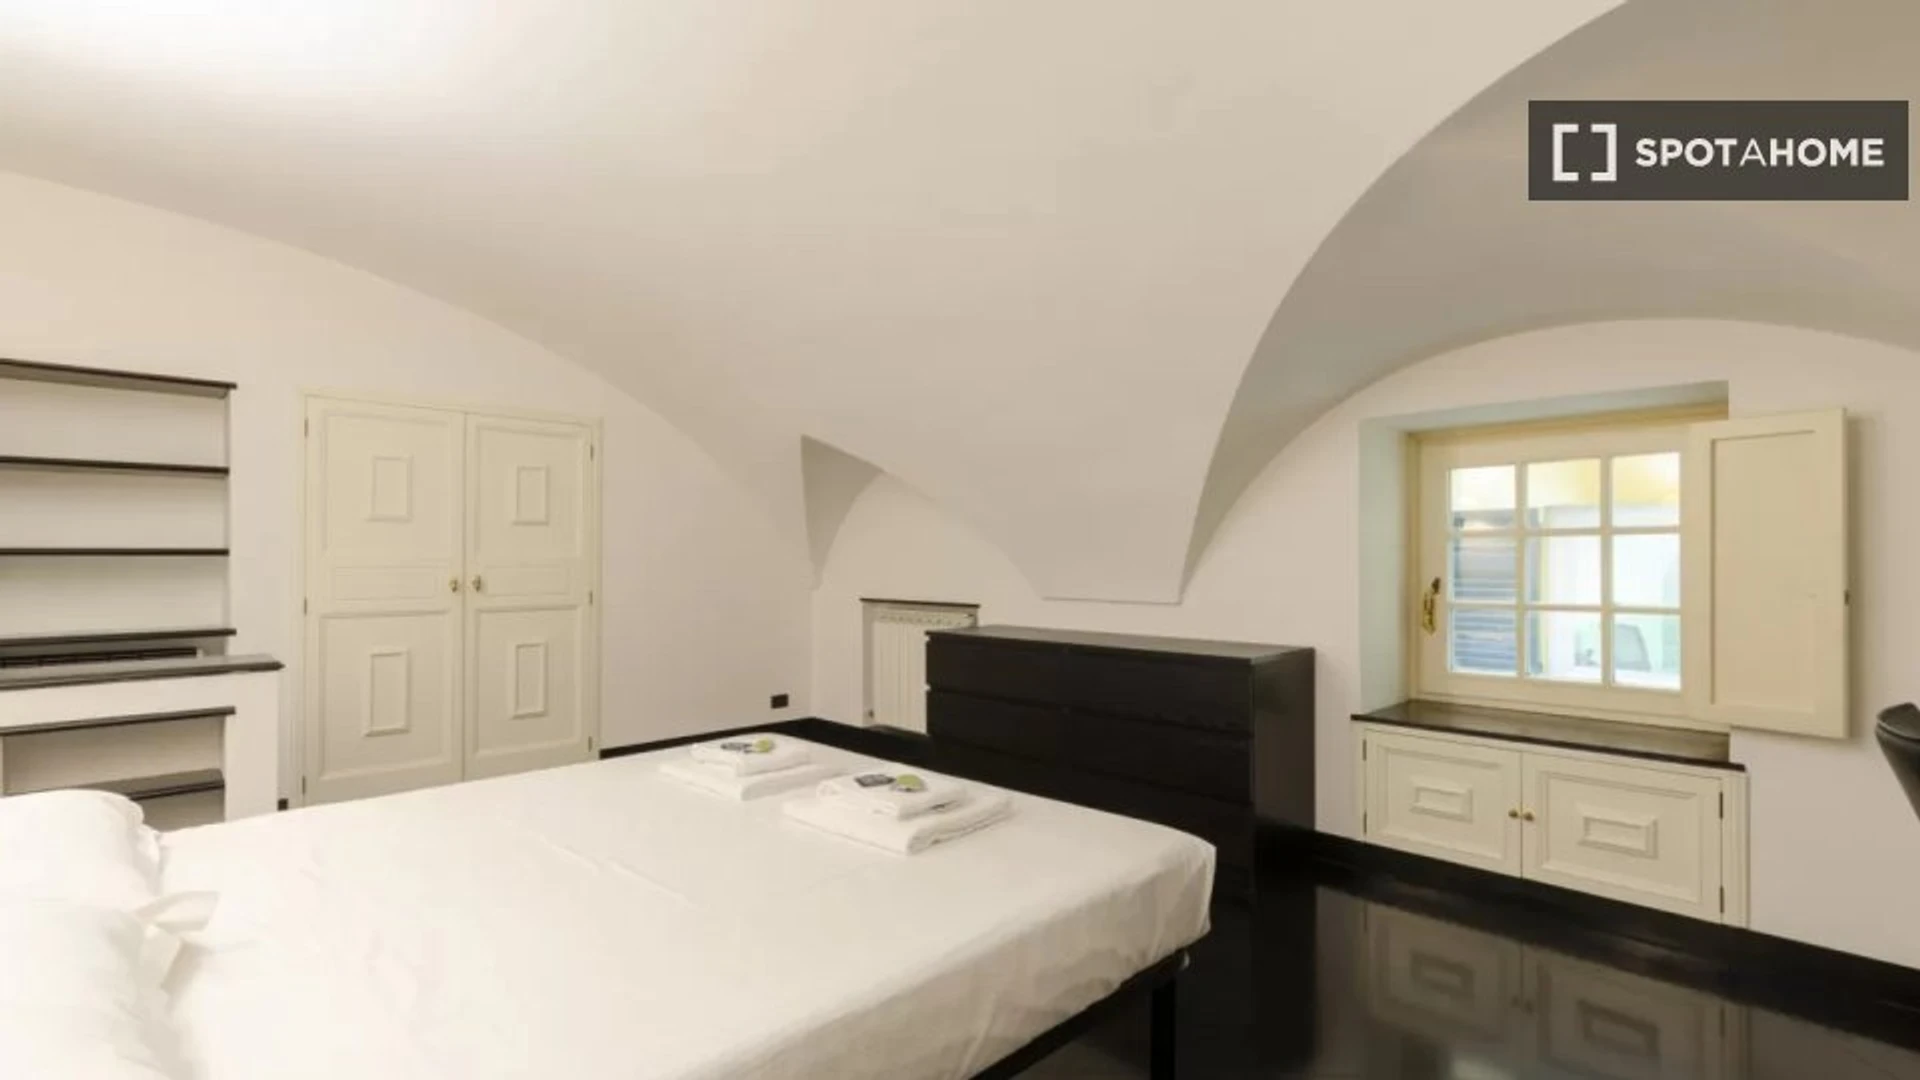 Accommodation in the centre of Genoa